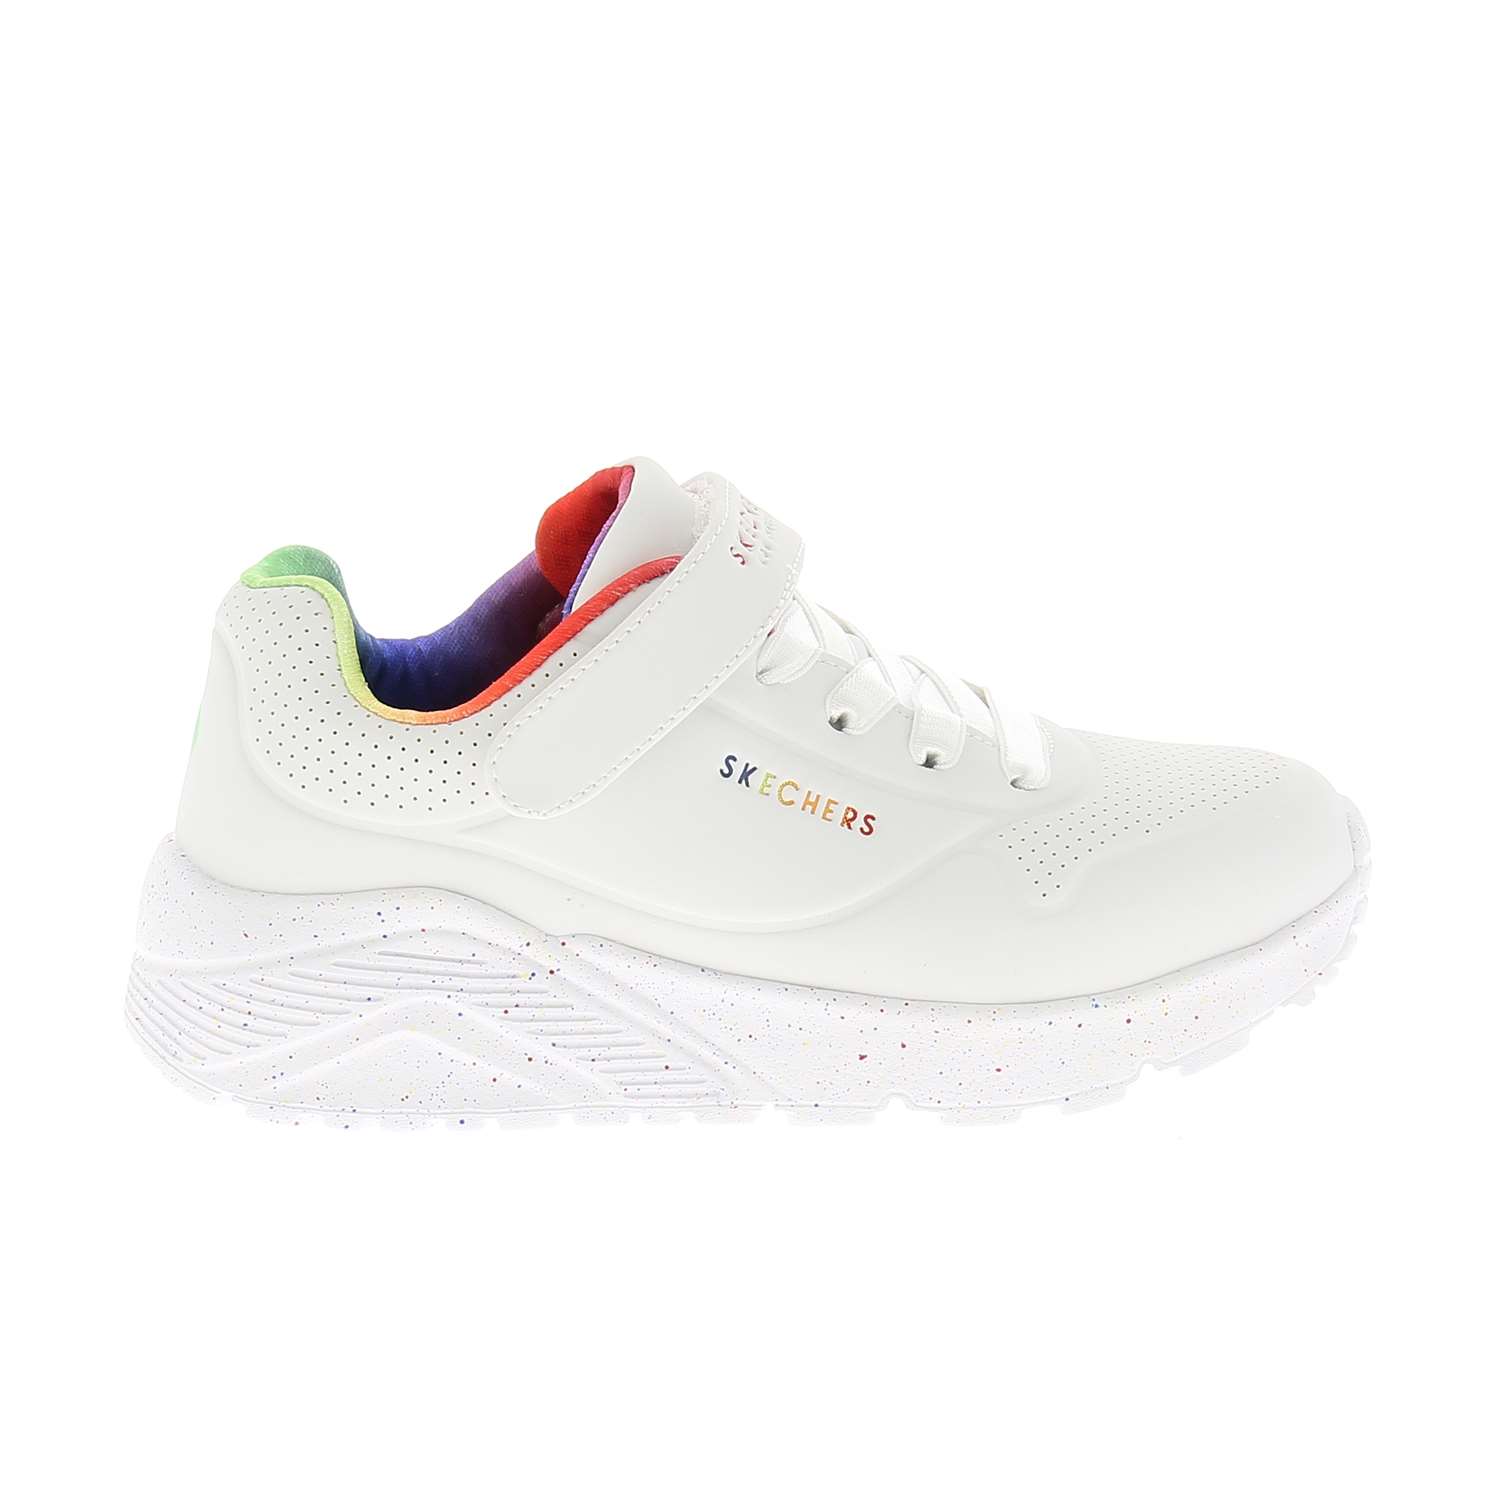 02 - UNO LIGHT - SKECHERS - Baskets - Synthétique